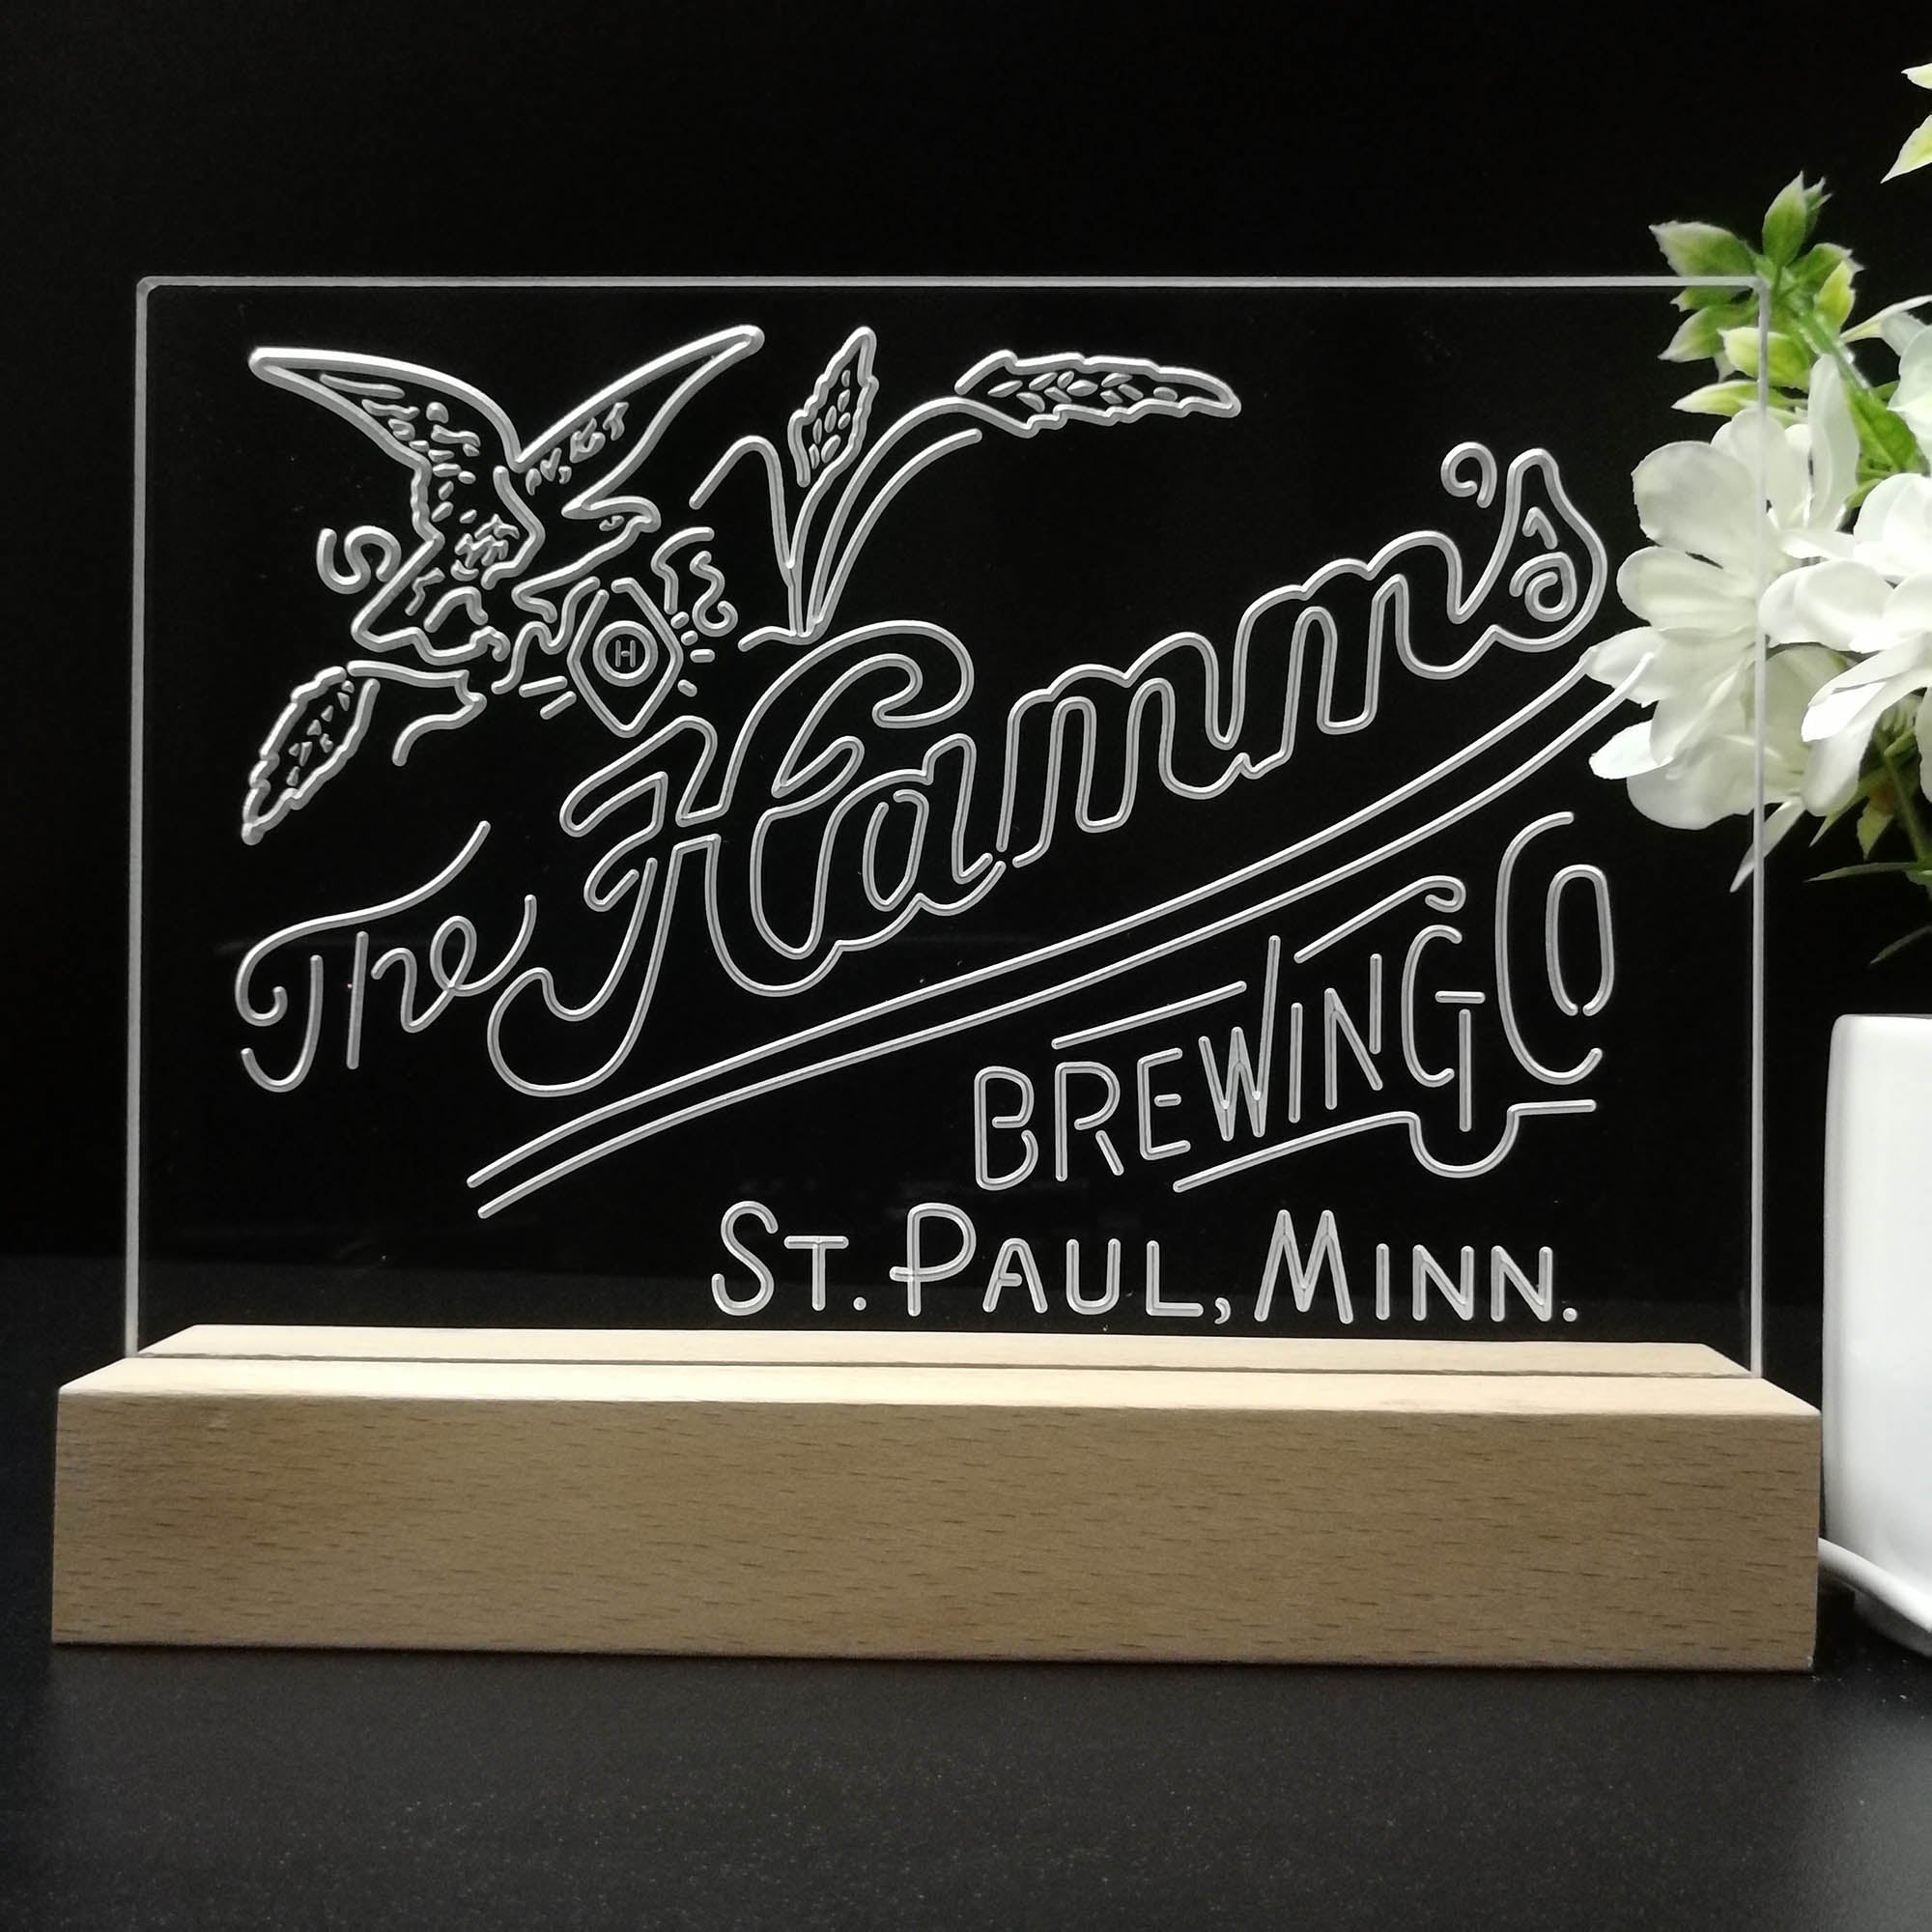 The Hamm's Brewing Company Night Light LED Sign